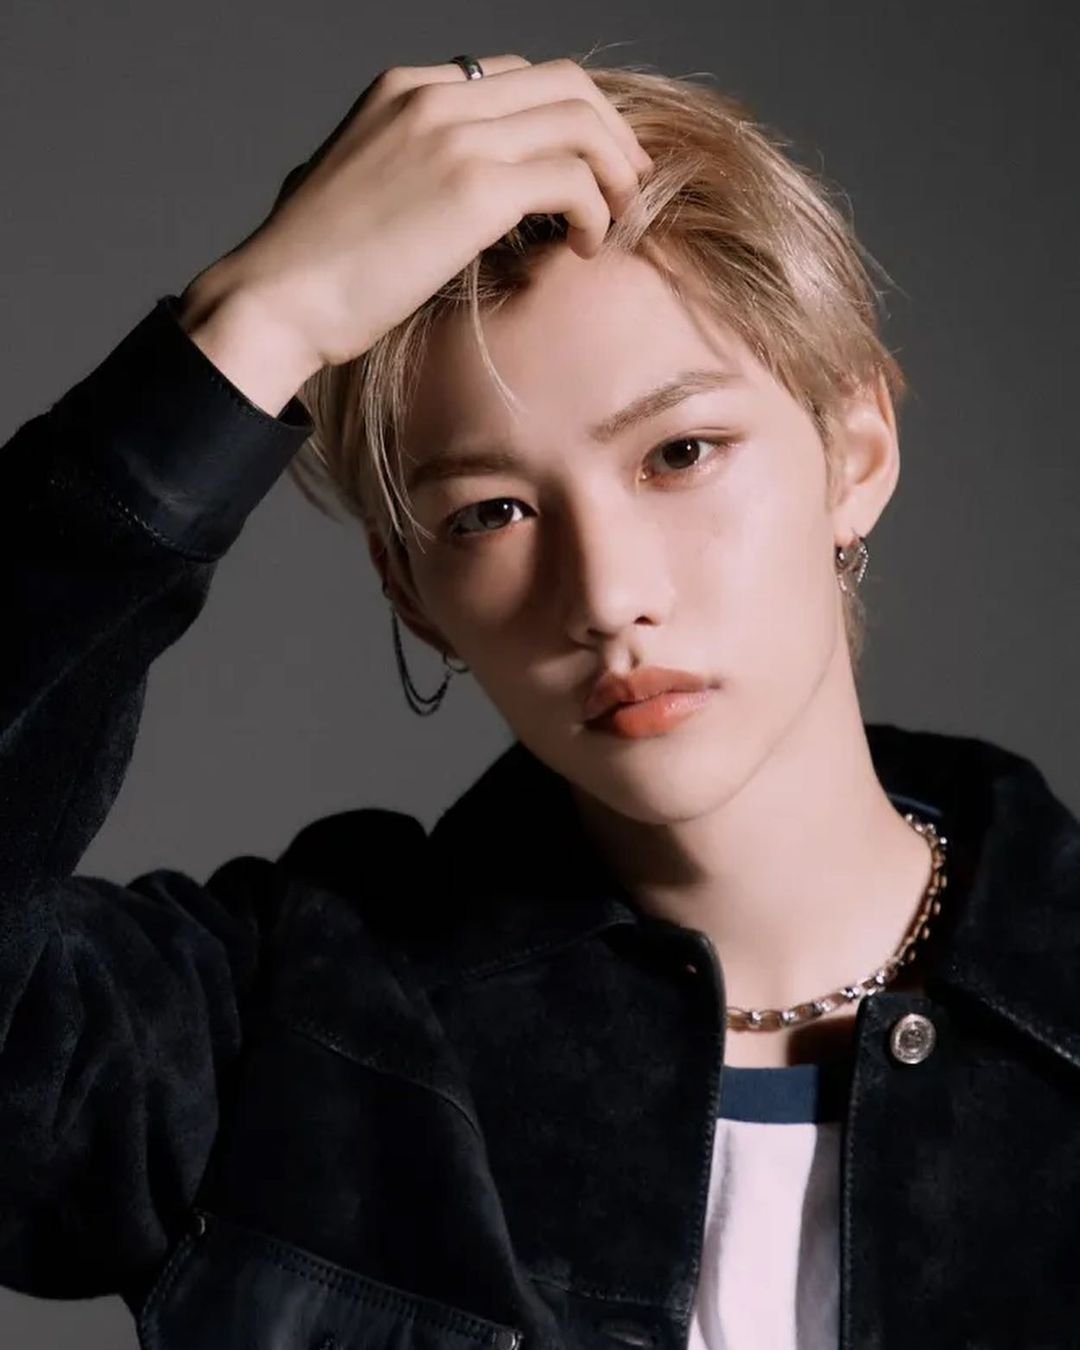 Felix Stray Kids - Biography, Profile, Facts, and Career